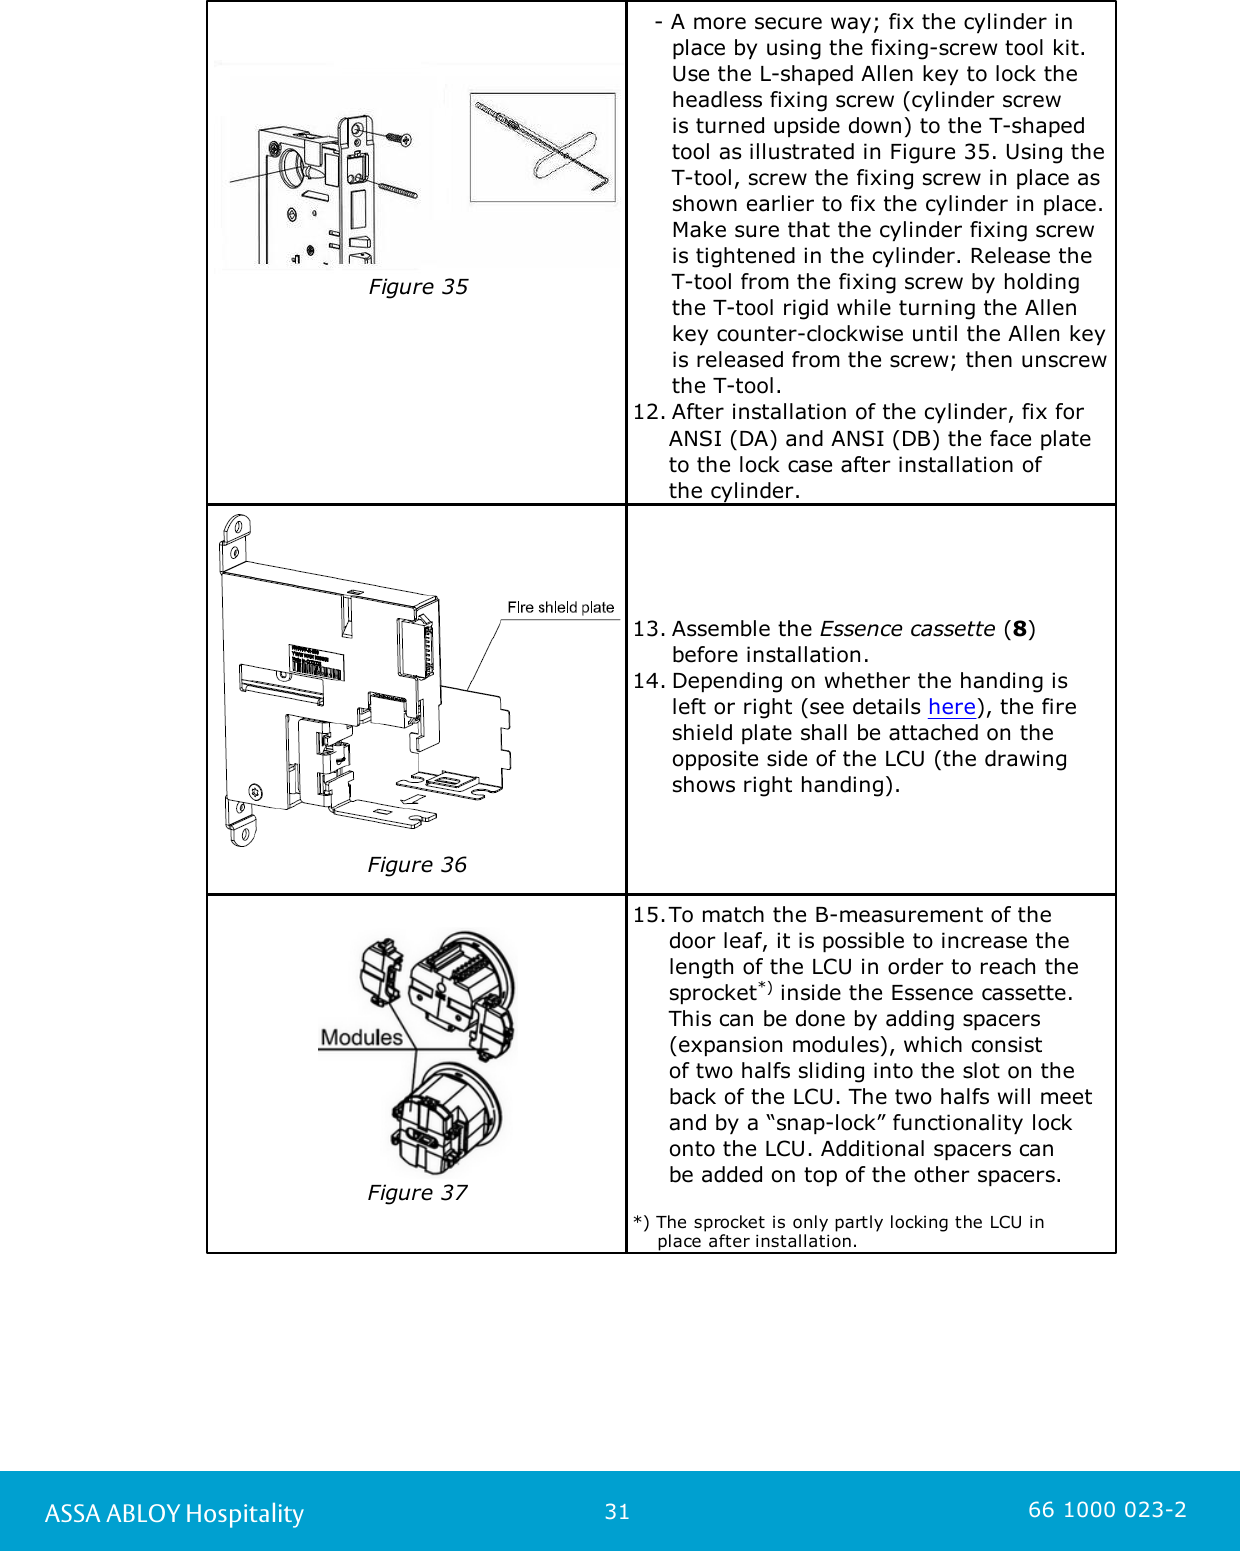 31ASSA ABLOY Hospitality 66 1000 023-2Figure 35                    - A more secure way; fix the cylinder in place by using the fixing-screw tool kit. Use the L-shaped Allen key to lock theheadless fixing screw (cylinder screw is turned upside down) to the T-shapedtool as illustrated in Figure 35. Using theT-tool, screw the fixing screw in place asshown earlier to fix the cylinder in place.Make sure that the cylinder fixing screwis tightened in the cylinder. Release theT-tool from the fixing screw by holdingthe T-tool rigid while turning the Allenkey counter-clockwise until the Allen keyis released from the screw; then unscrewthe T-tool. 12. After installation of the cylinder, fix for      ANSI (DA) and ANSI (DB) the face plate     to the lock case after installation of      the cylinder. Figure 3613. Assemble the Essence cassette (8) before installation.14. Depending on whether the handing is left or right (see details here), the fireshield plate shall be attached on theopposite side of the LCU (the drawingshows right handing).Figure 3715.To match the B-measurement of the door leaf, it is possible to increase thelength of the LCU in order to reach thesprocket*) inside the Essence cassette.This can be done by adding spacers(expansion modules), which consist of two halfs sliding into the slot on theback of the LCU. The two halfs will meetand by a “snap-lock” functionality lockonto the LCU. Additional spacers canbe added on top of the other spacers. *) The sprocket is only partly locking the LCU in     place after installation.